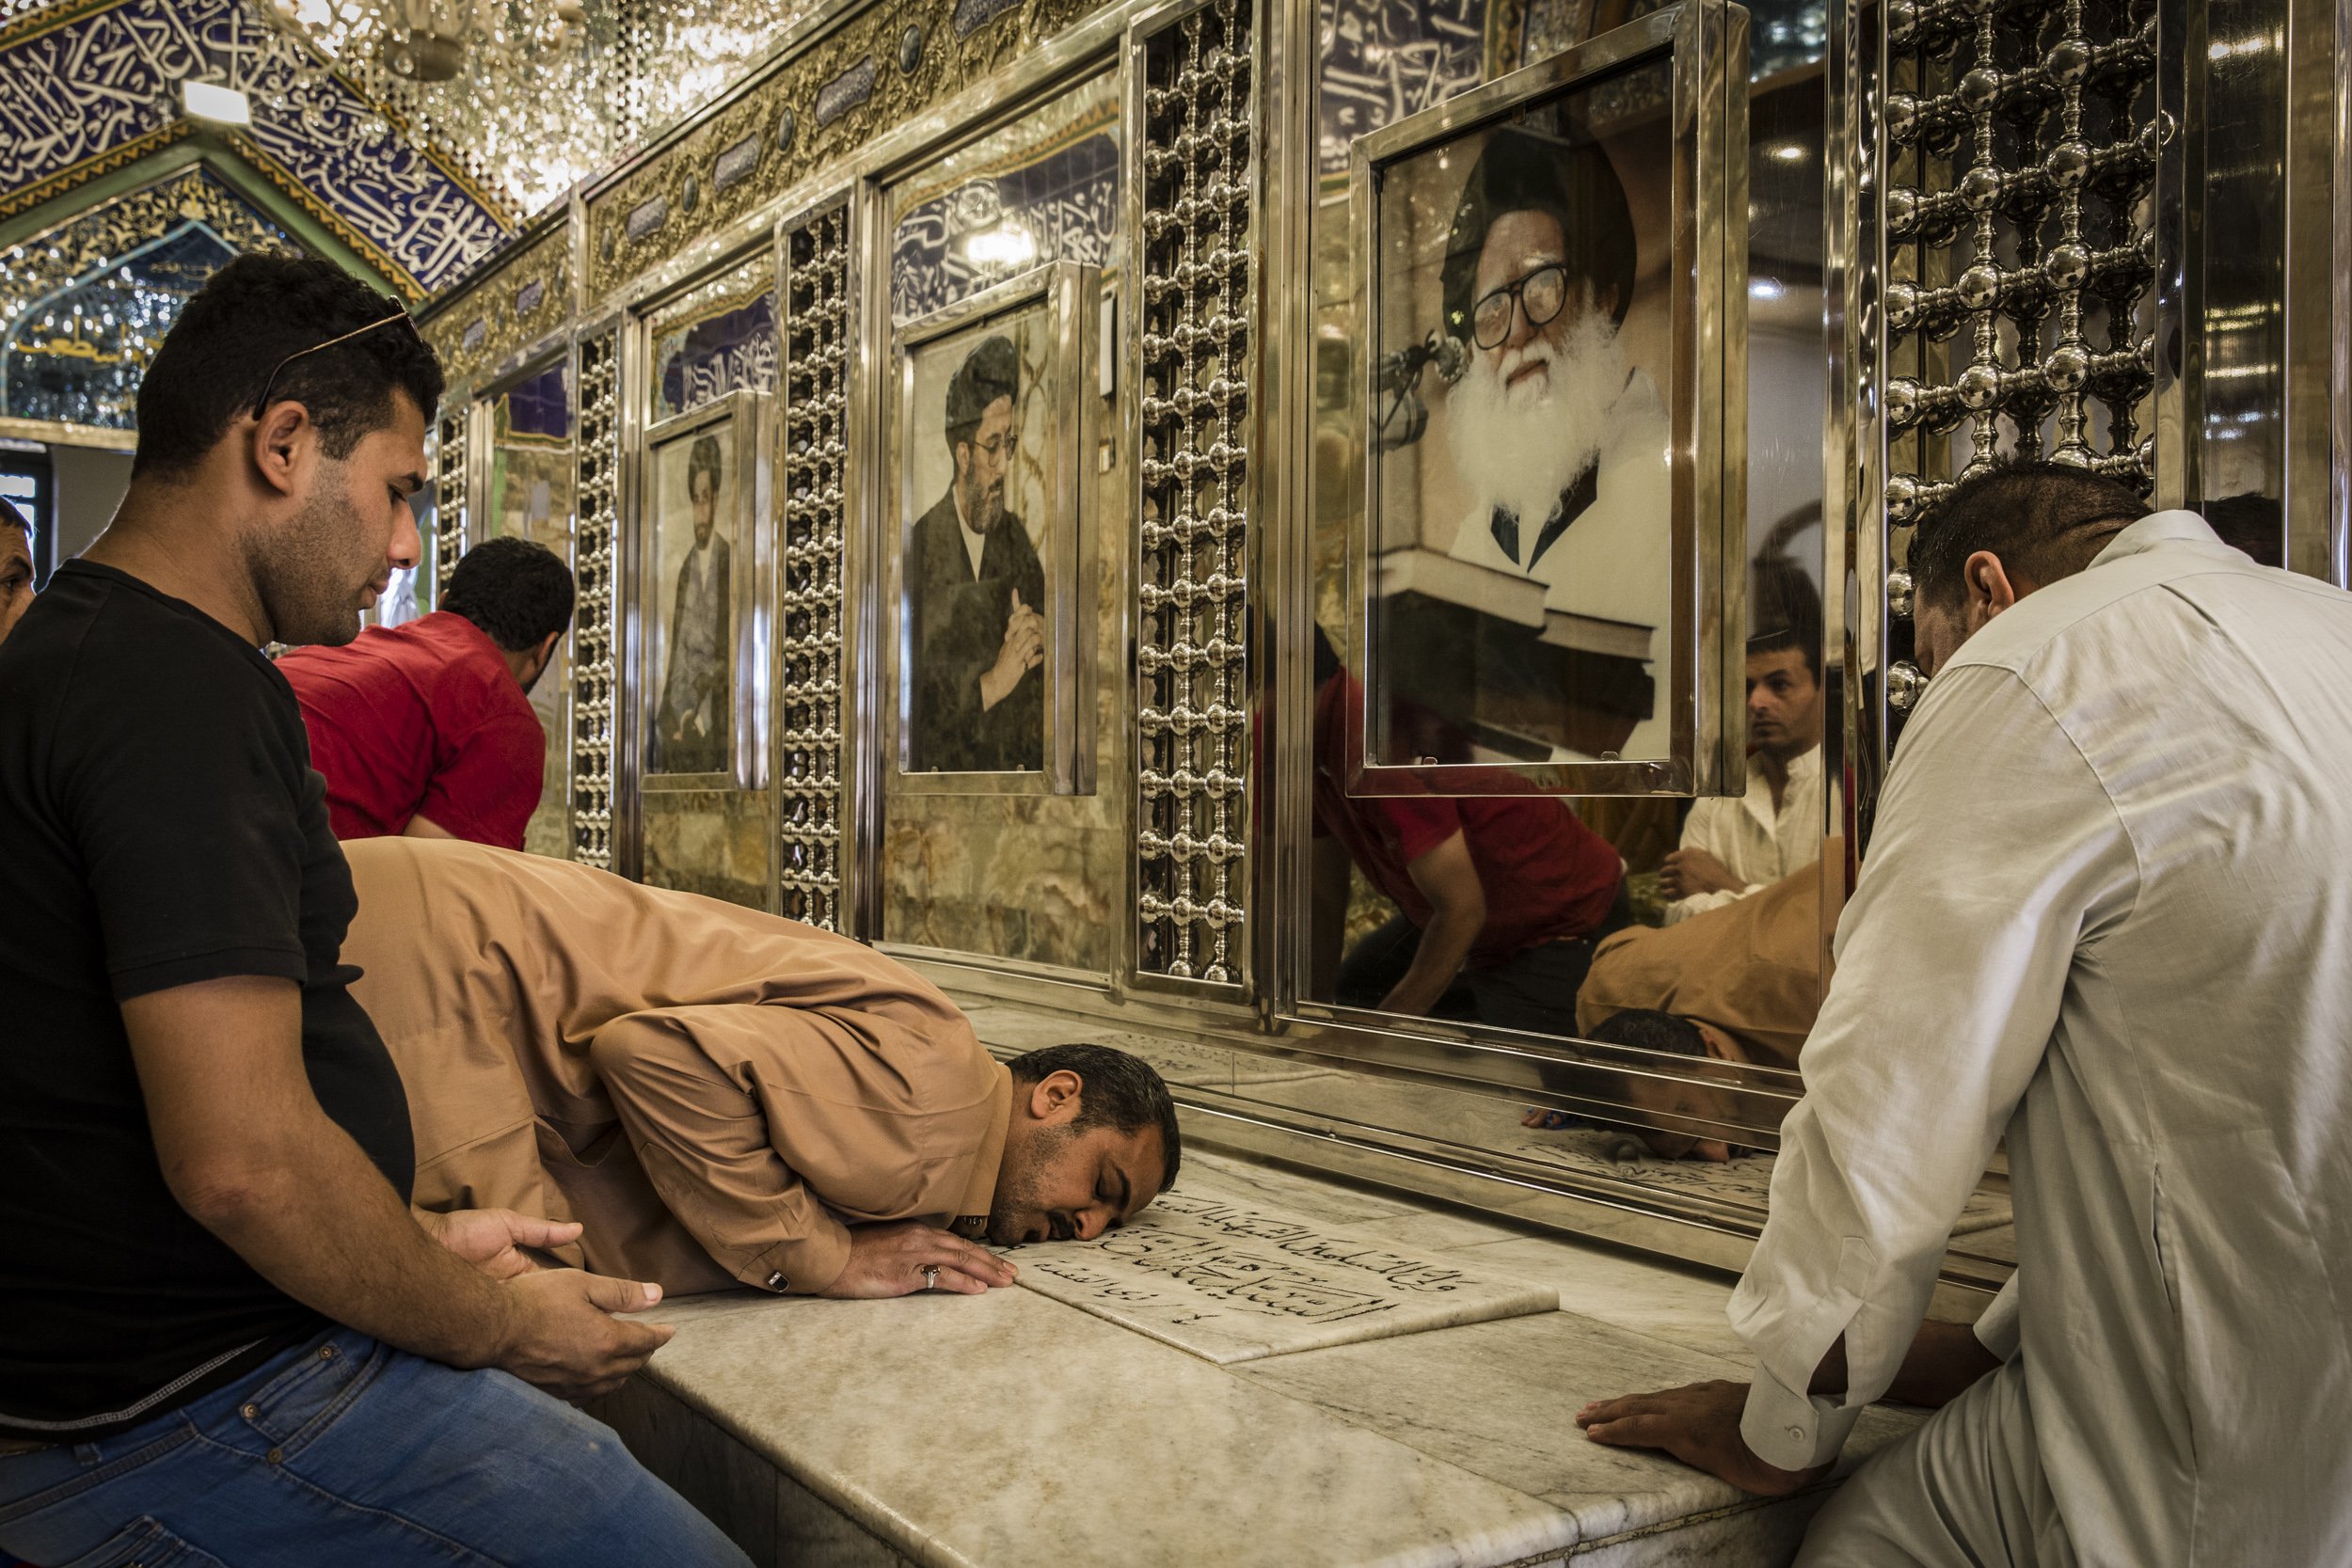  Shiite pilgrims visited the shrine of powerful Iraqi cleric Muqtada al-Sadr’s&nbsp;father and brothers who were assassinated by gunmen loyal to Saddam Hussein in the late 90’s.  